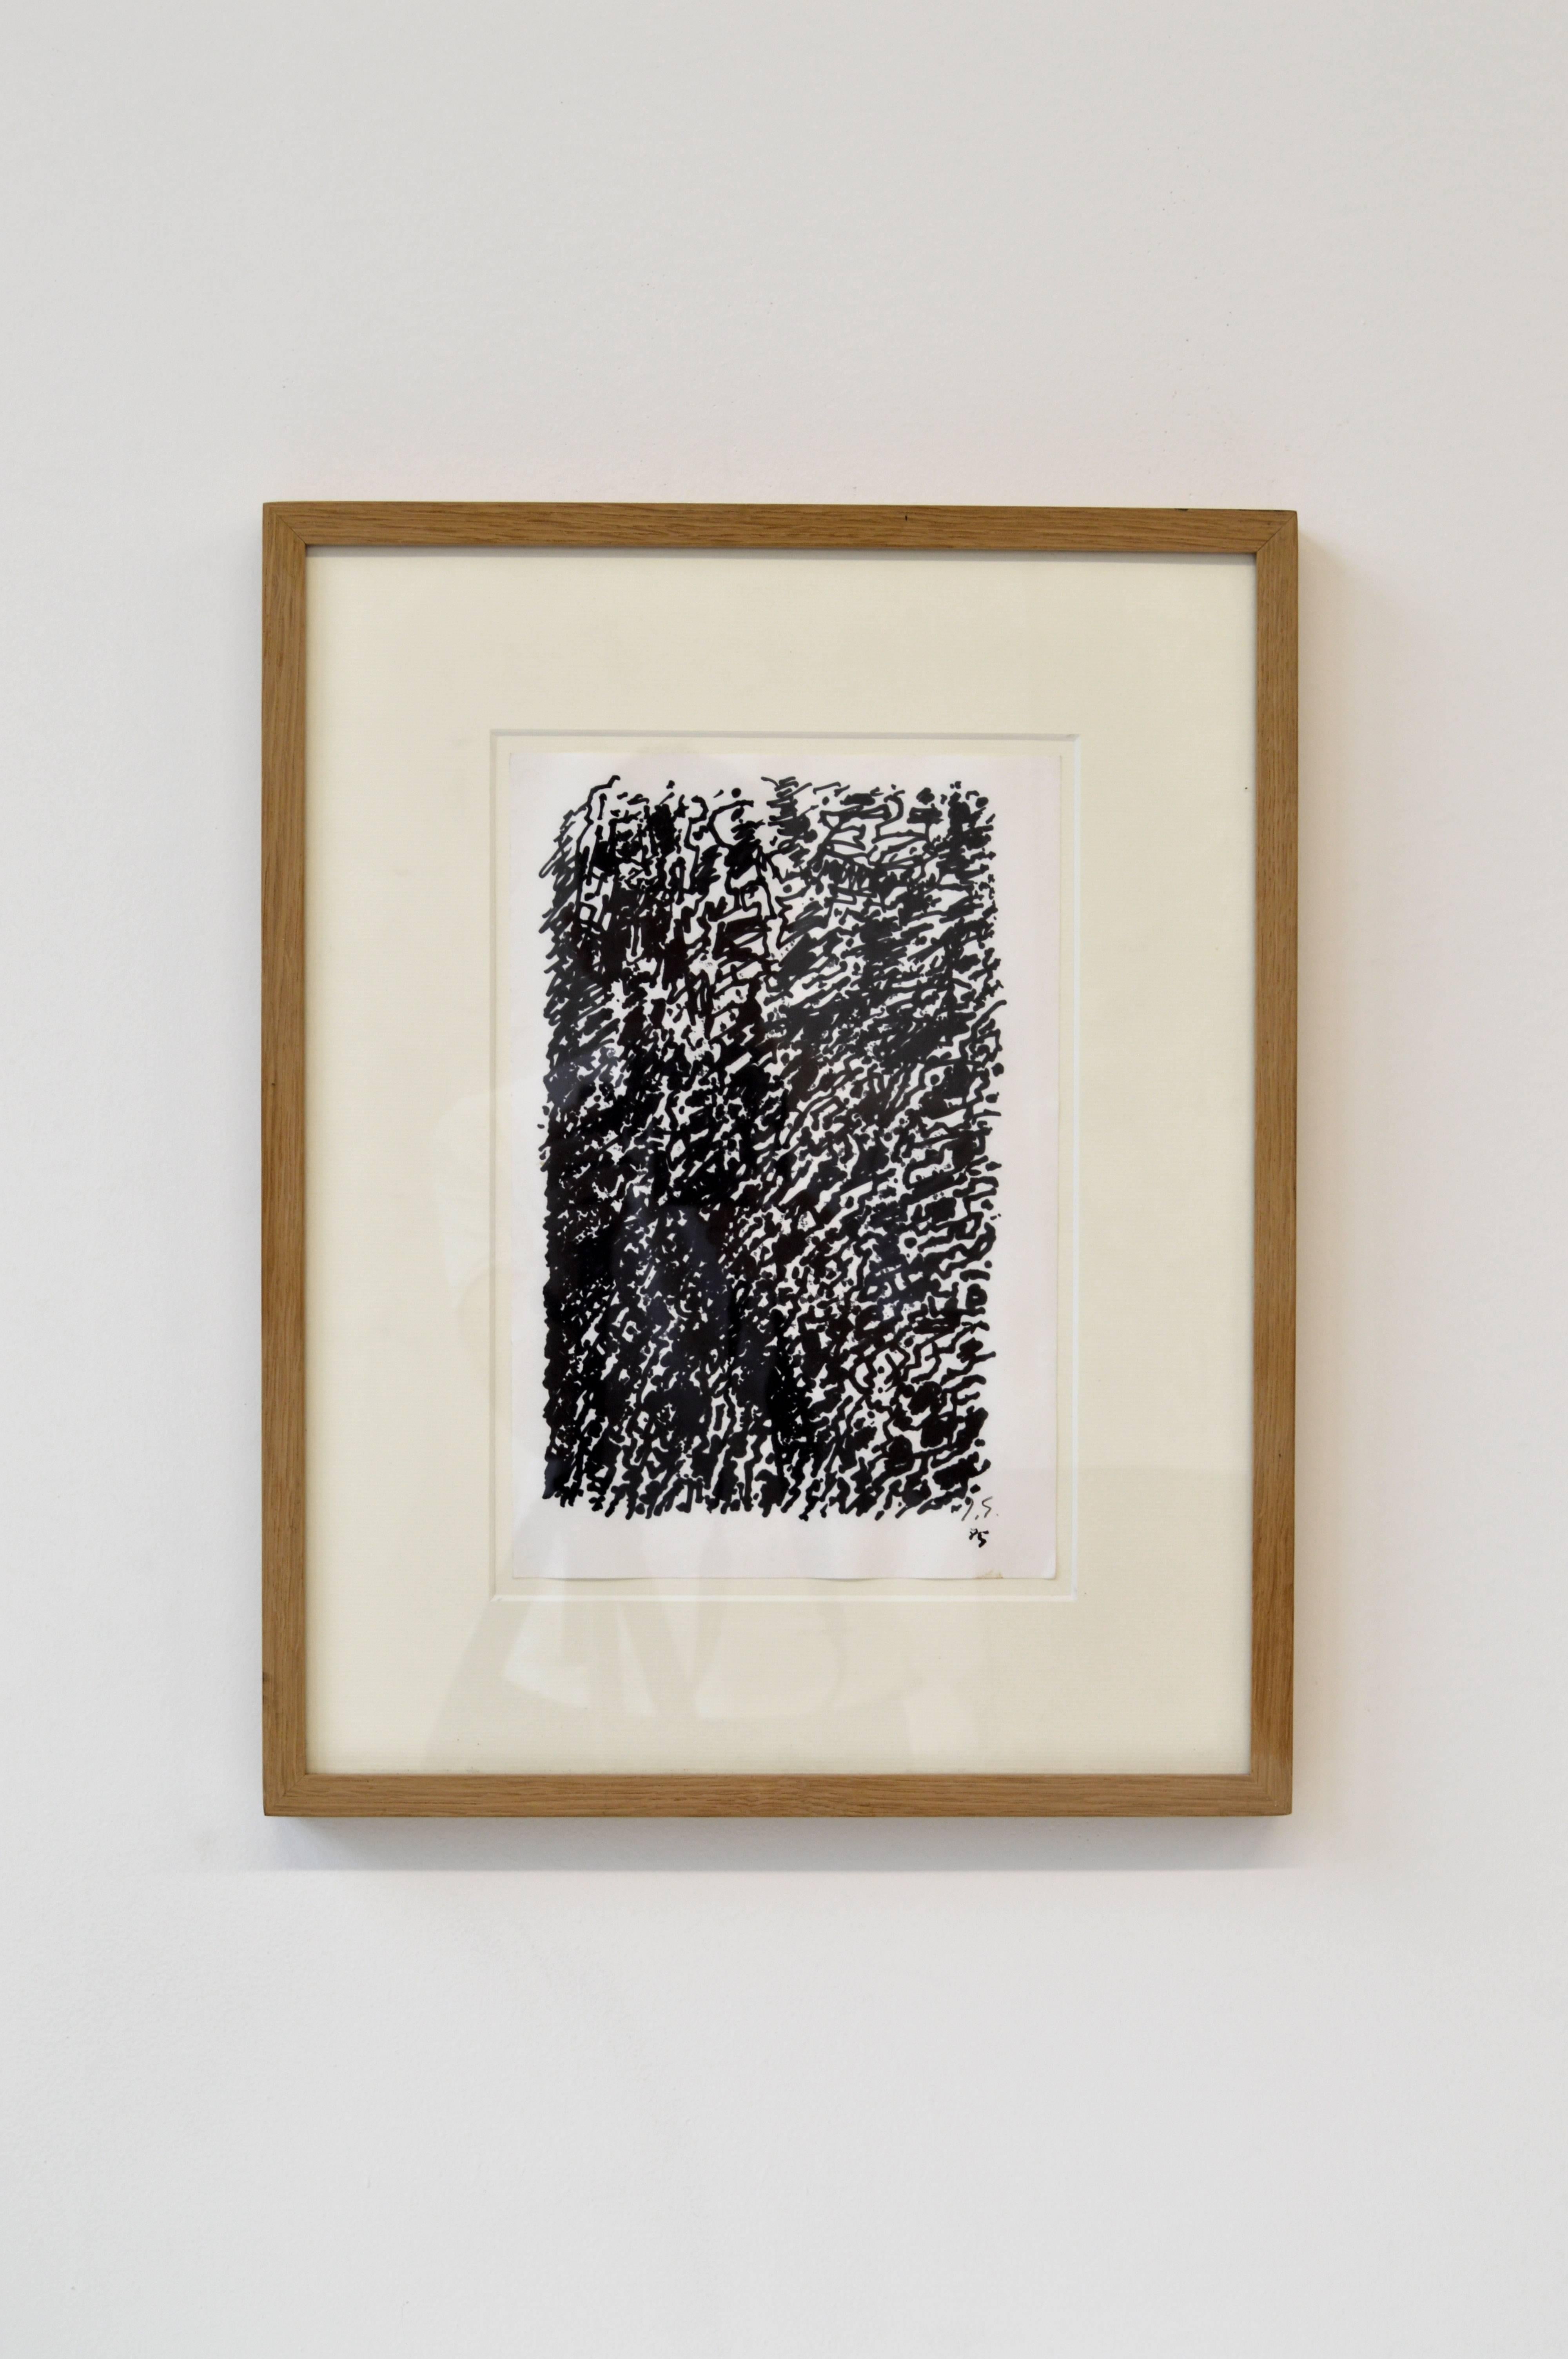 Black and white abstract drawing by French artist Jacques Germain framed in a natural light wood frame. Jacques Germain was a prominent member of the Abstraction Lyrique group in post-war Paris, and his work is exhibited in several museums worldwide